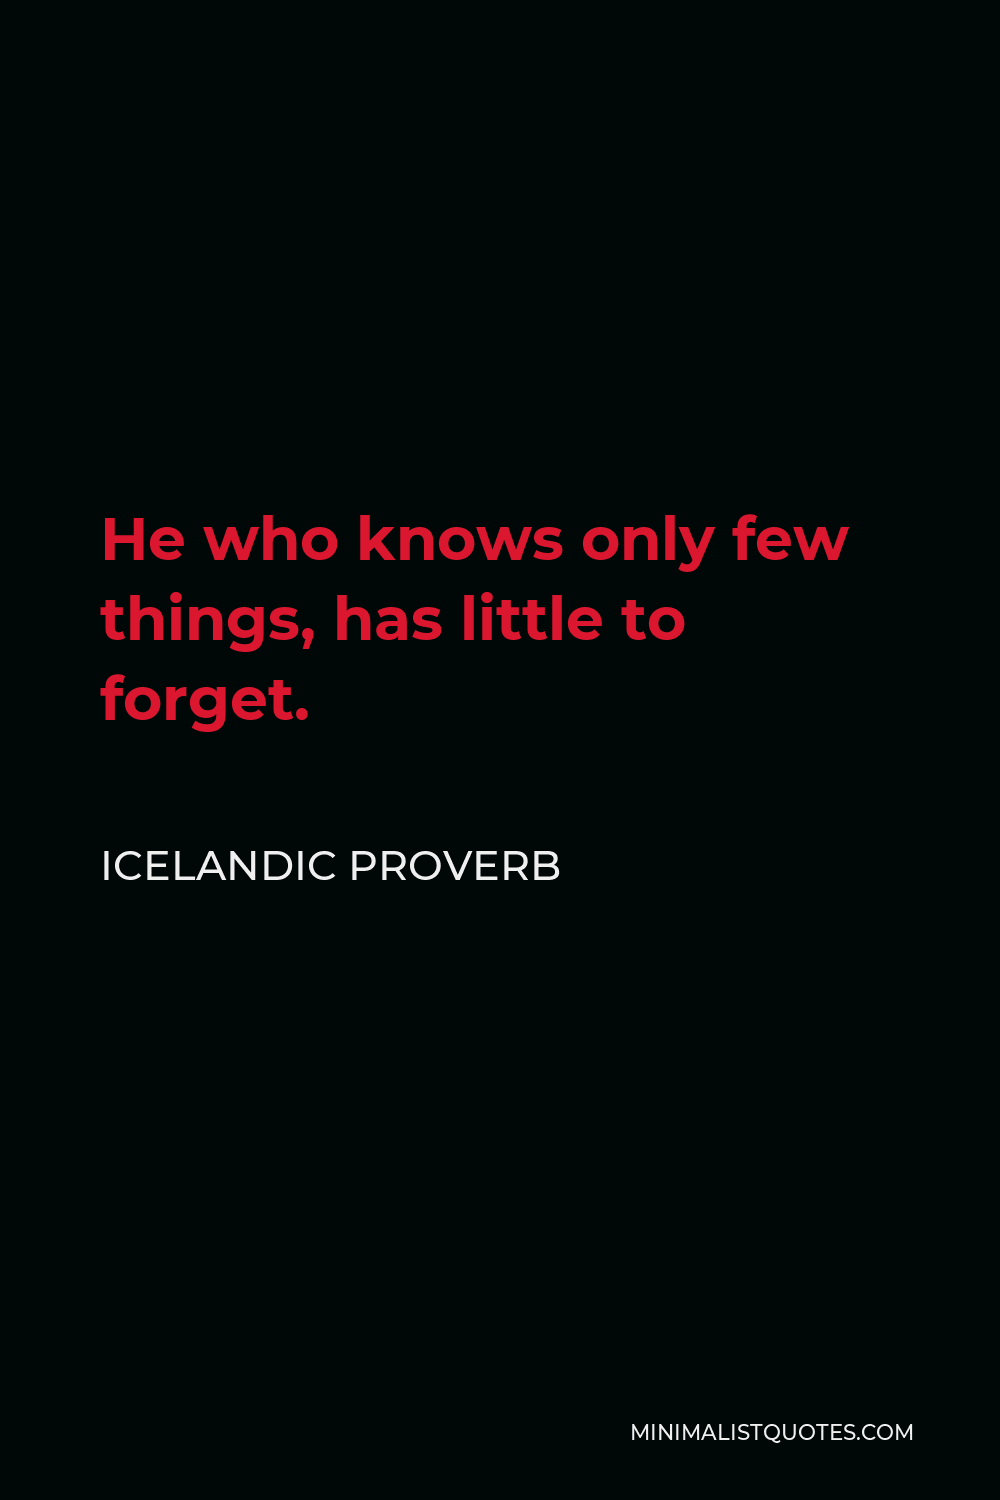 Icelandic Proverb Quote - He who knows only few things, has little to forget.